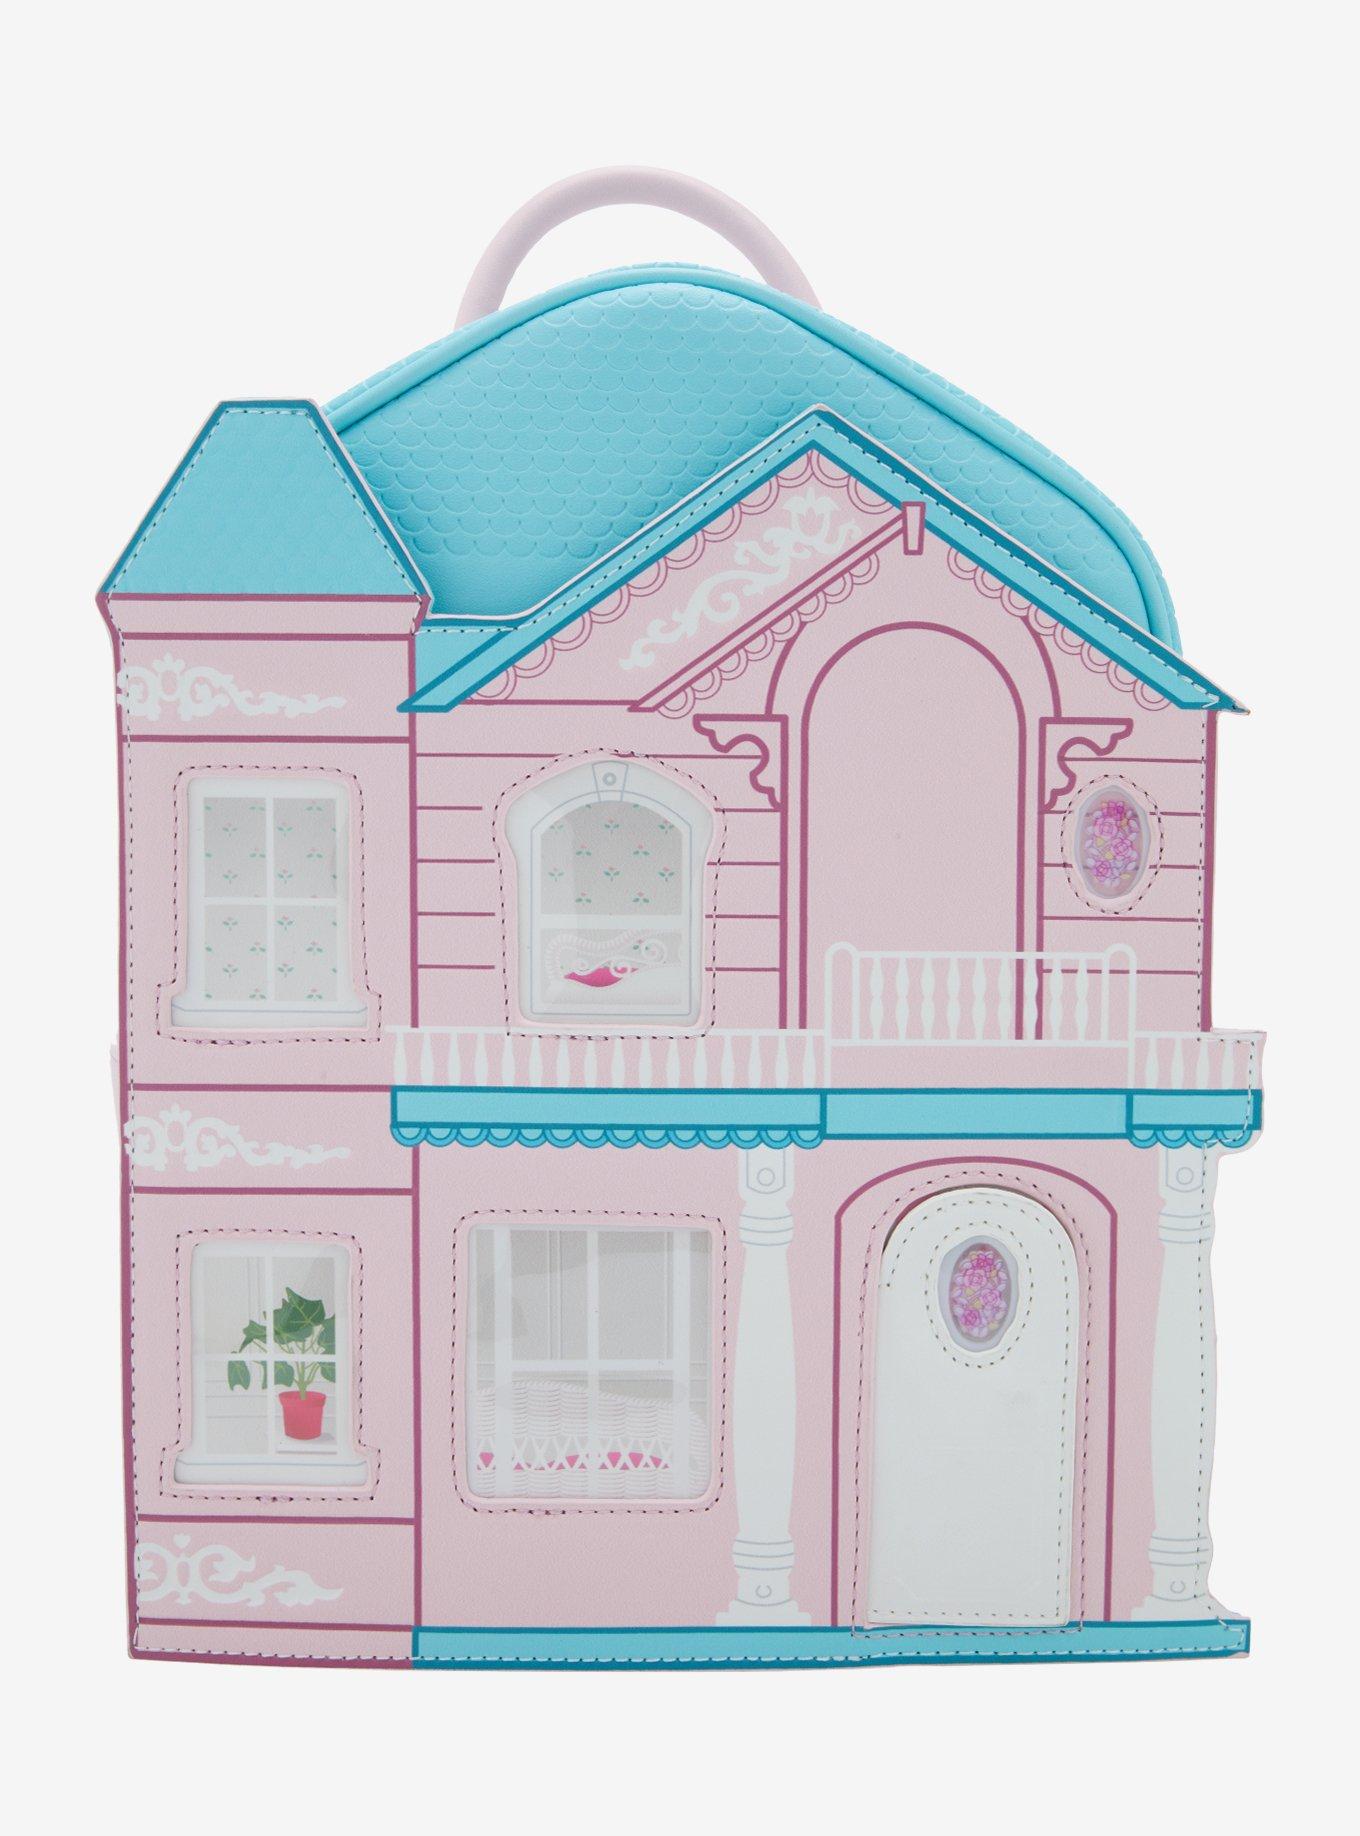 The nightmare of Barbie's Dreamhouse